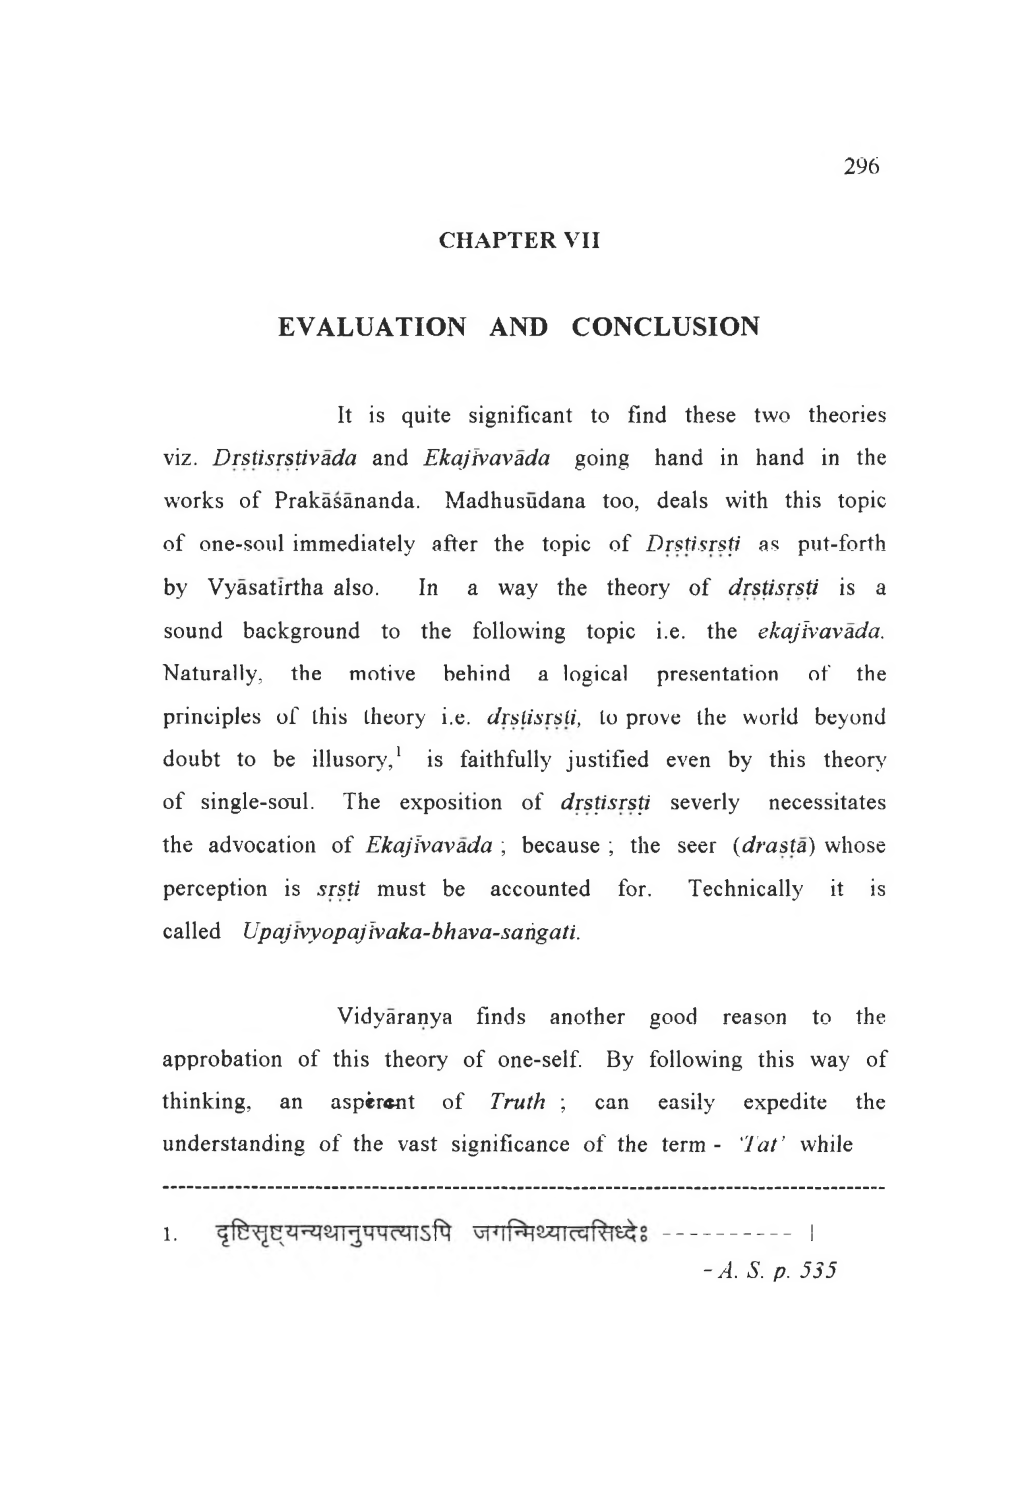 Evaluation and Conclusion